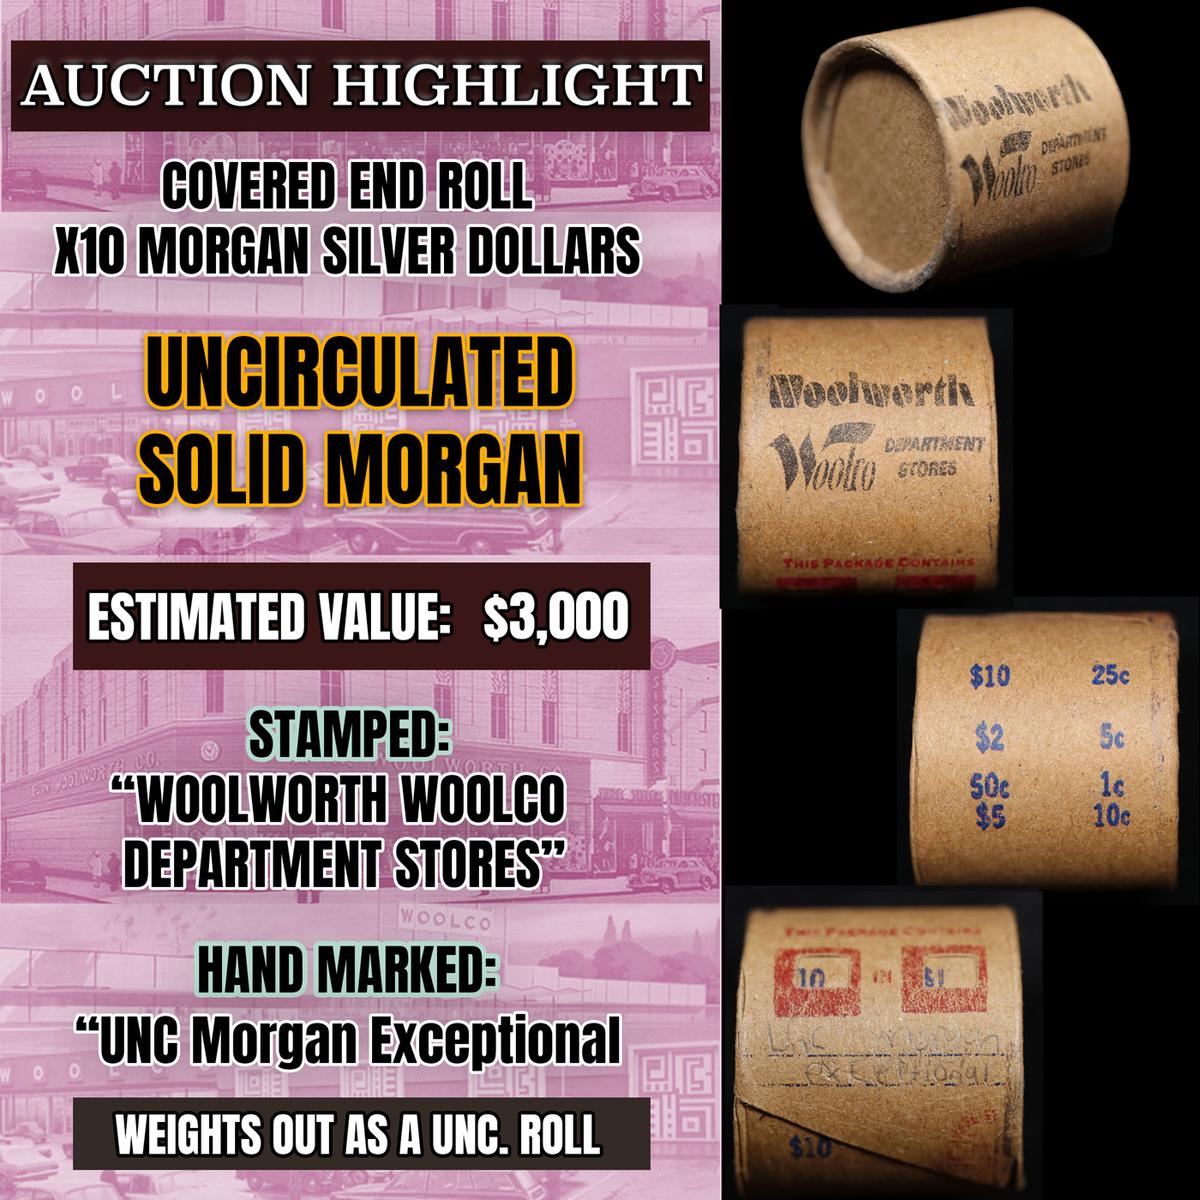 *EXCLUSIVE* x10 Morgan Covered End Roll! Marked "Unc Morgan Exceptional"! - Huge Vault Hoard  (FC)